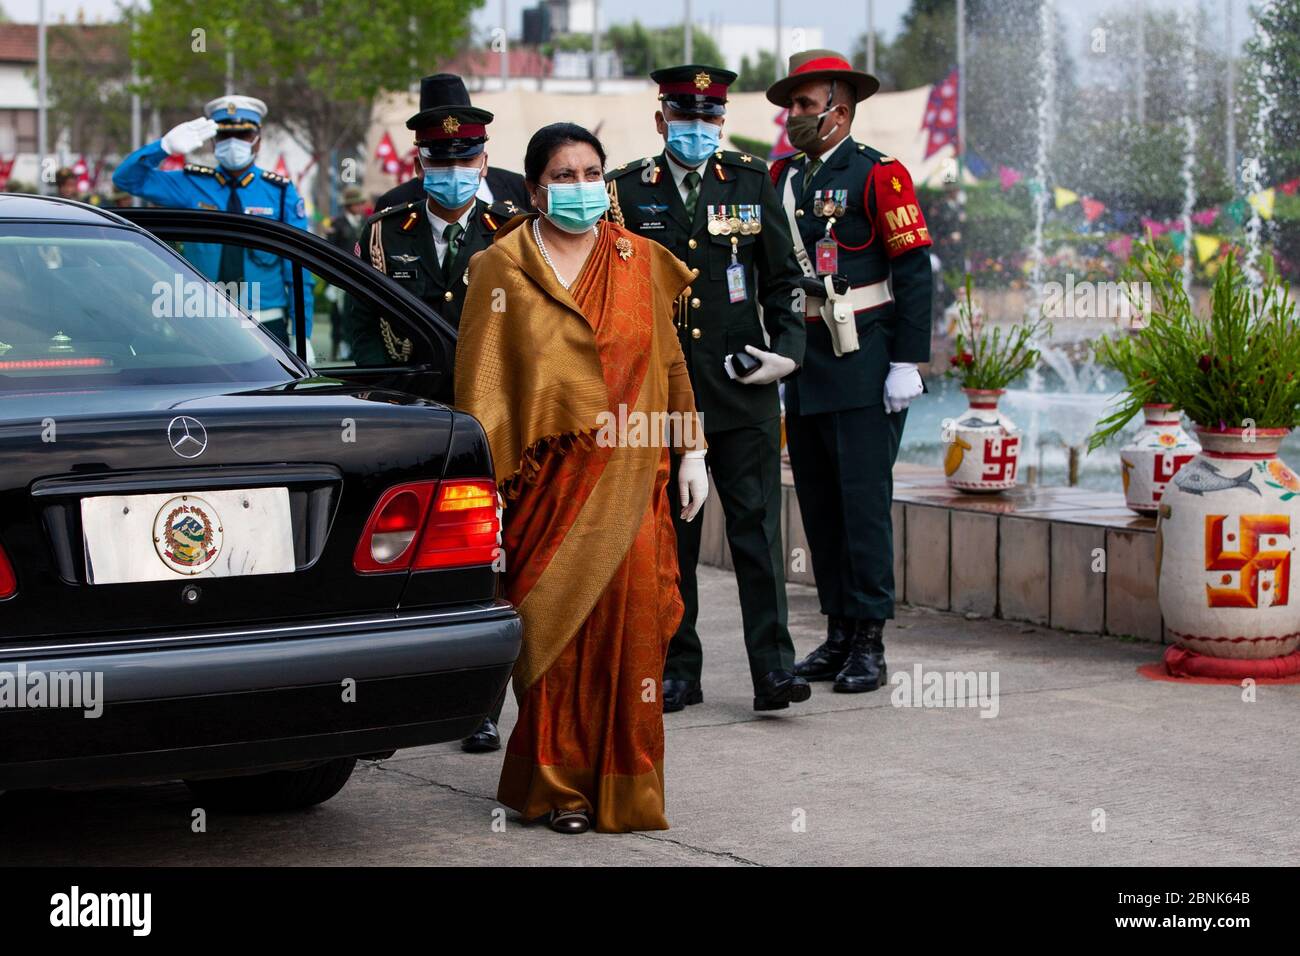 Nepal's President Bidhya Devi Bhandari arrives for the presentation of the government's policies and programs for the upcoming fiscal year while wearing a face mask as a preventive measure at the parliament during the Coronavirus (COVID-19) lockdown crisis.Nepal has so far confirmed 278 coronavirus cases with 35 recovered. Stock Photo